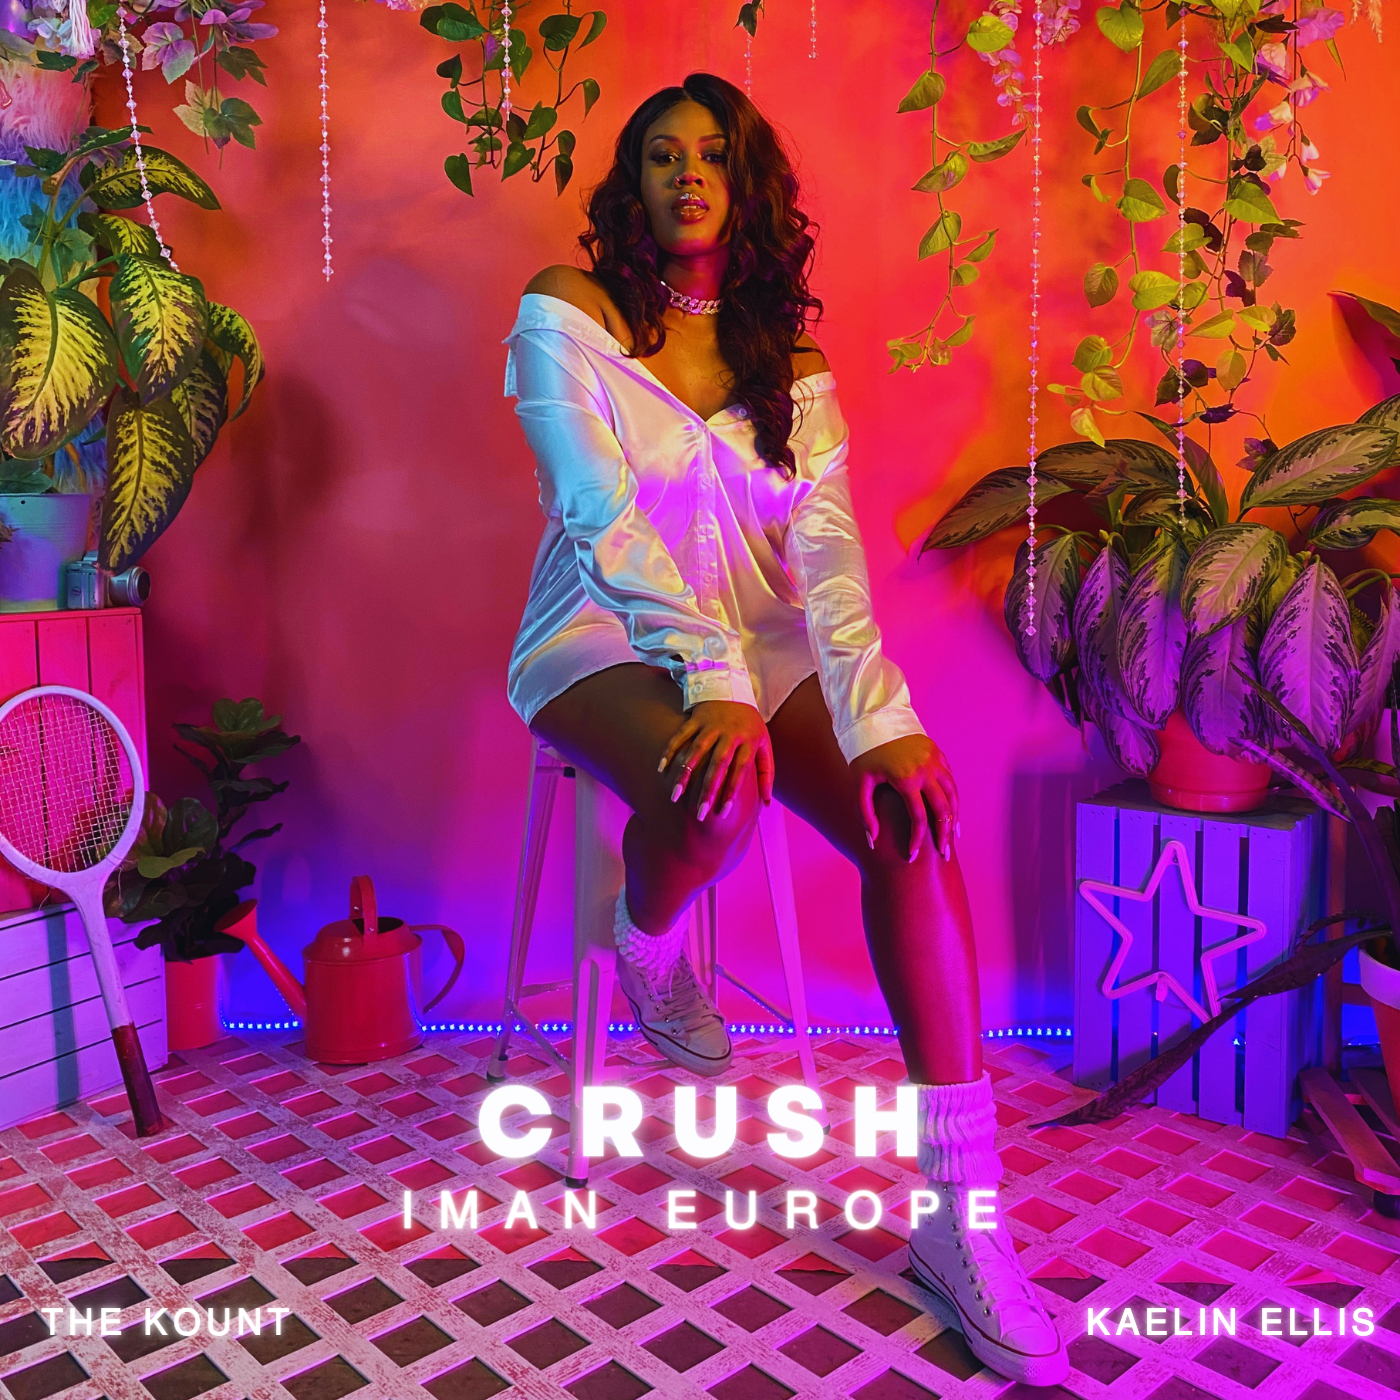 Cover art for crush by Iman Europe